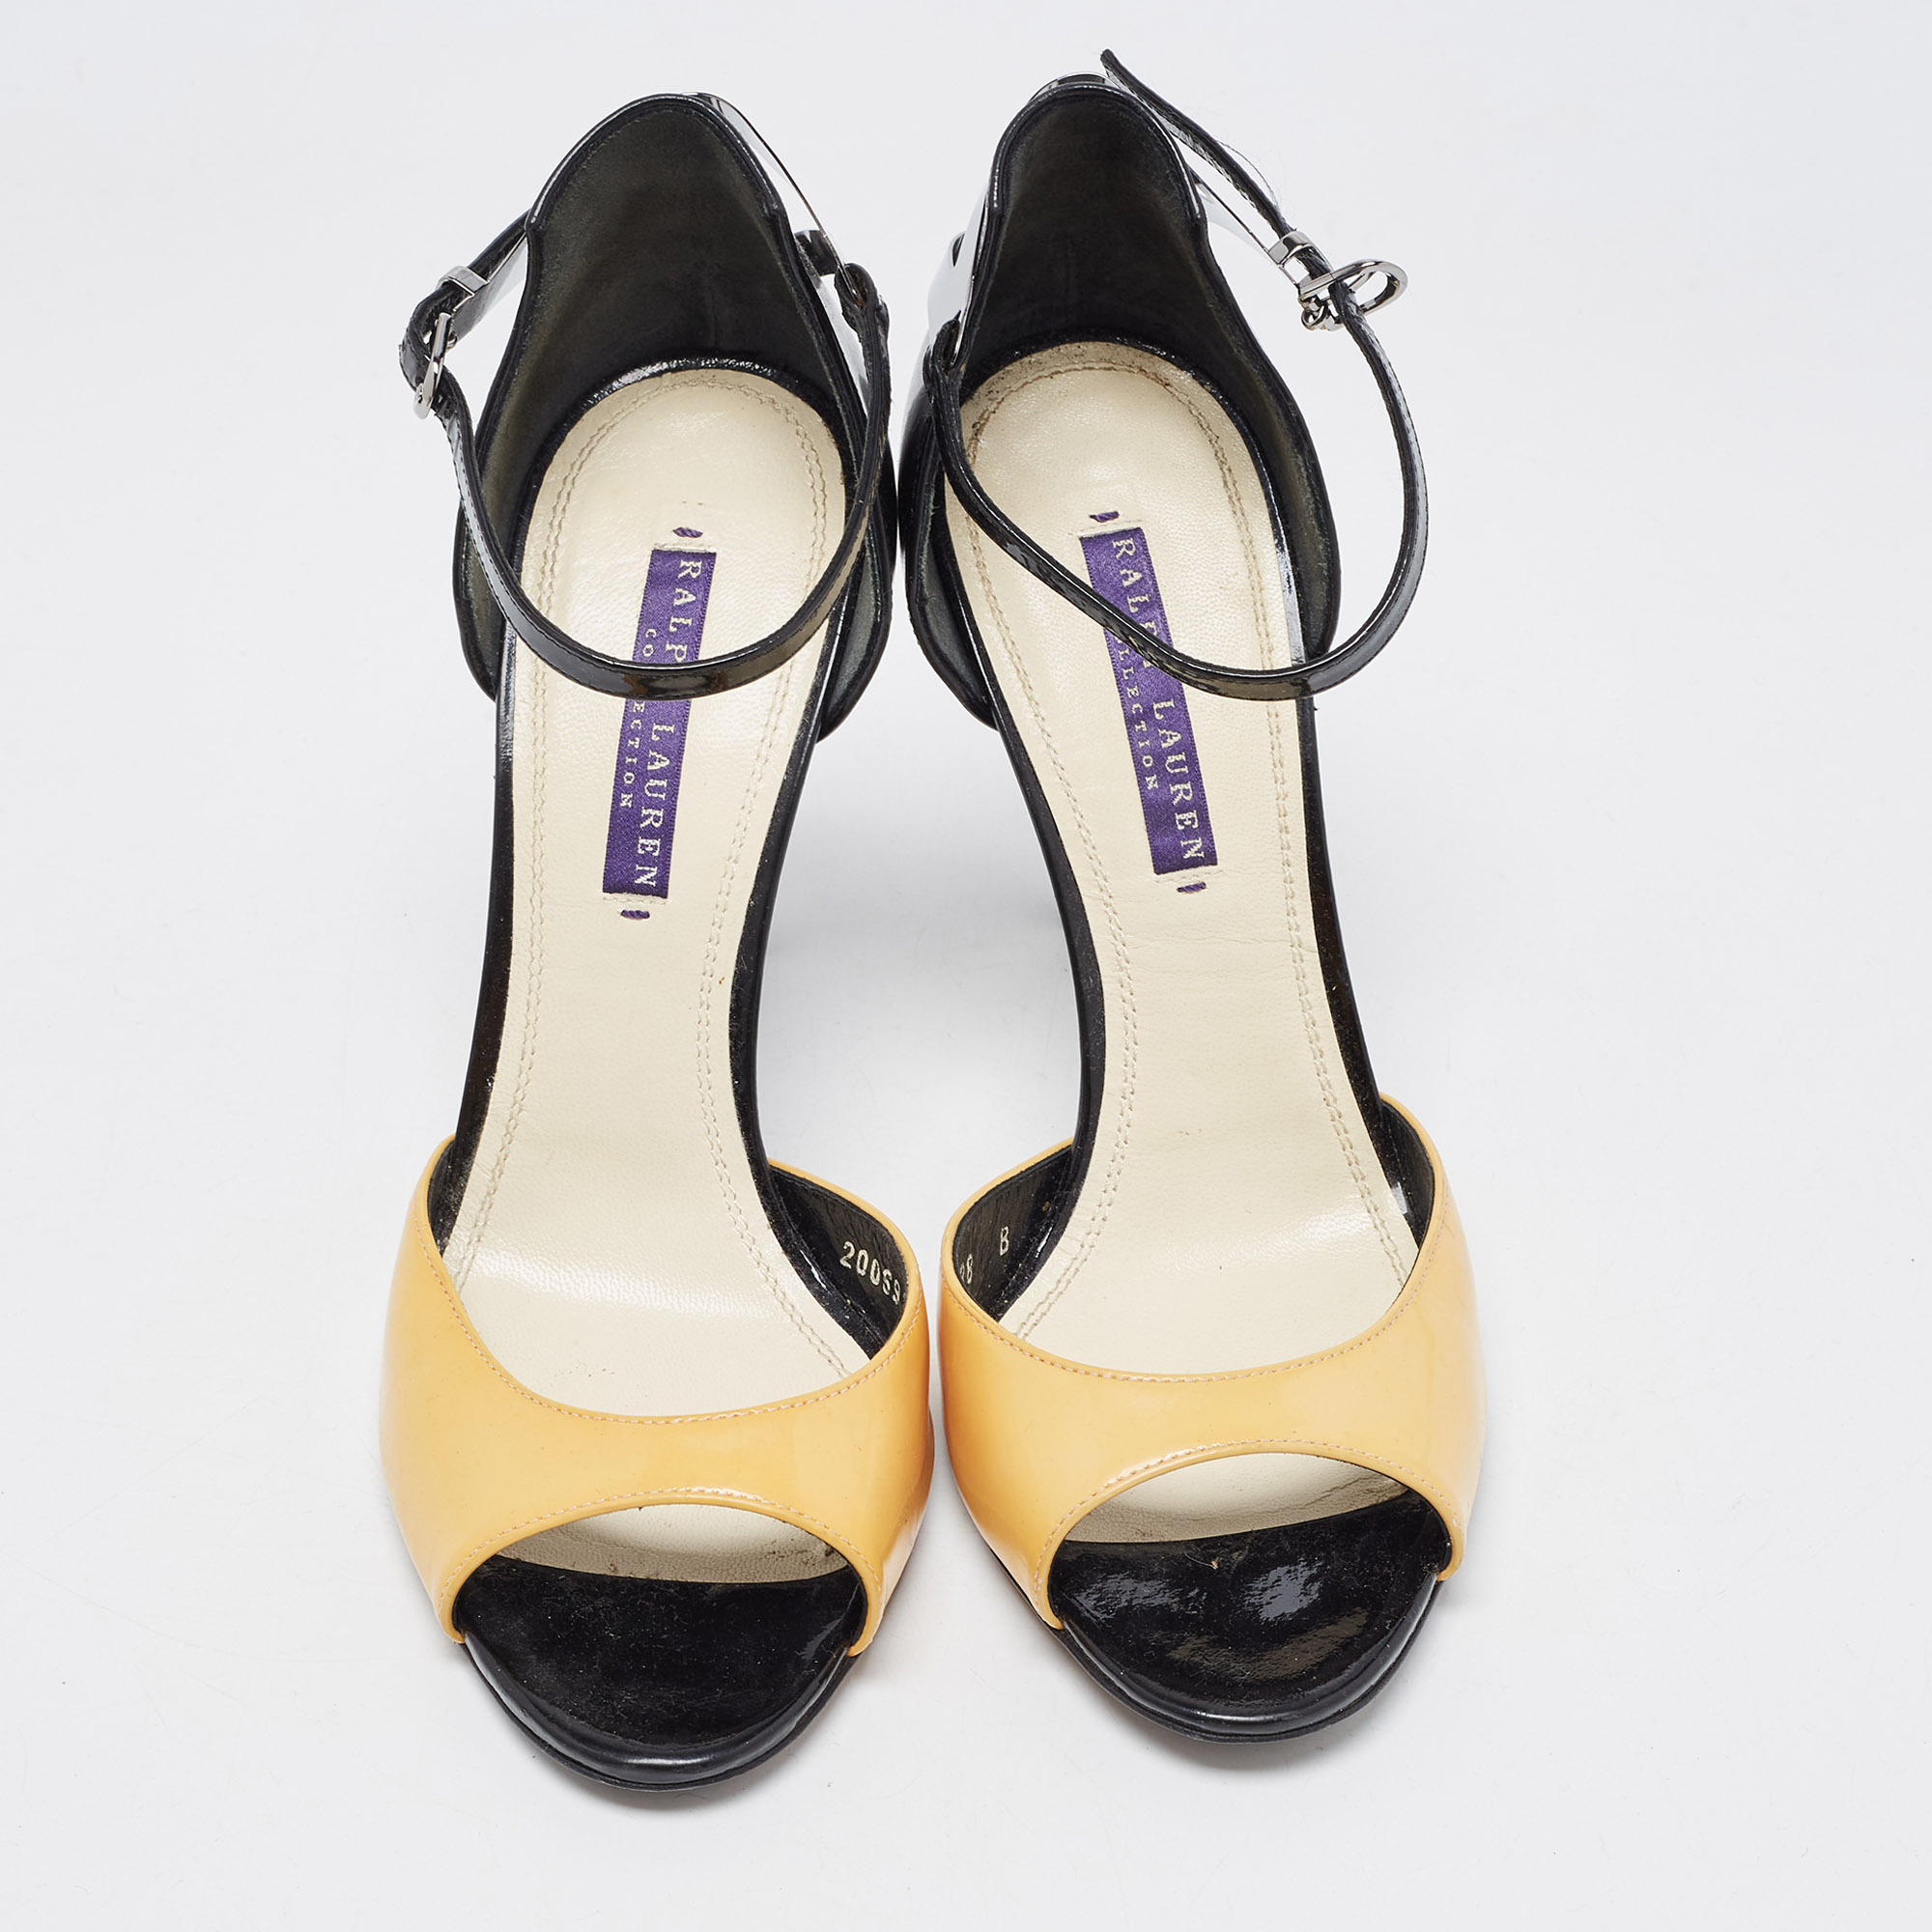 Ralph Lauren Collection Black/yellow Patent Leather Peep Toe Sandals Size 38